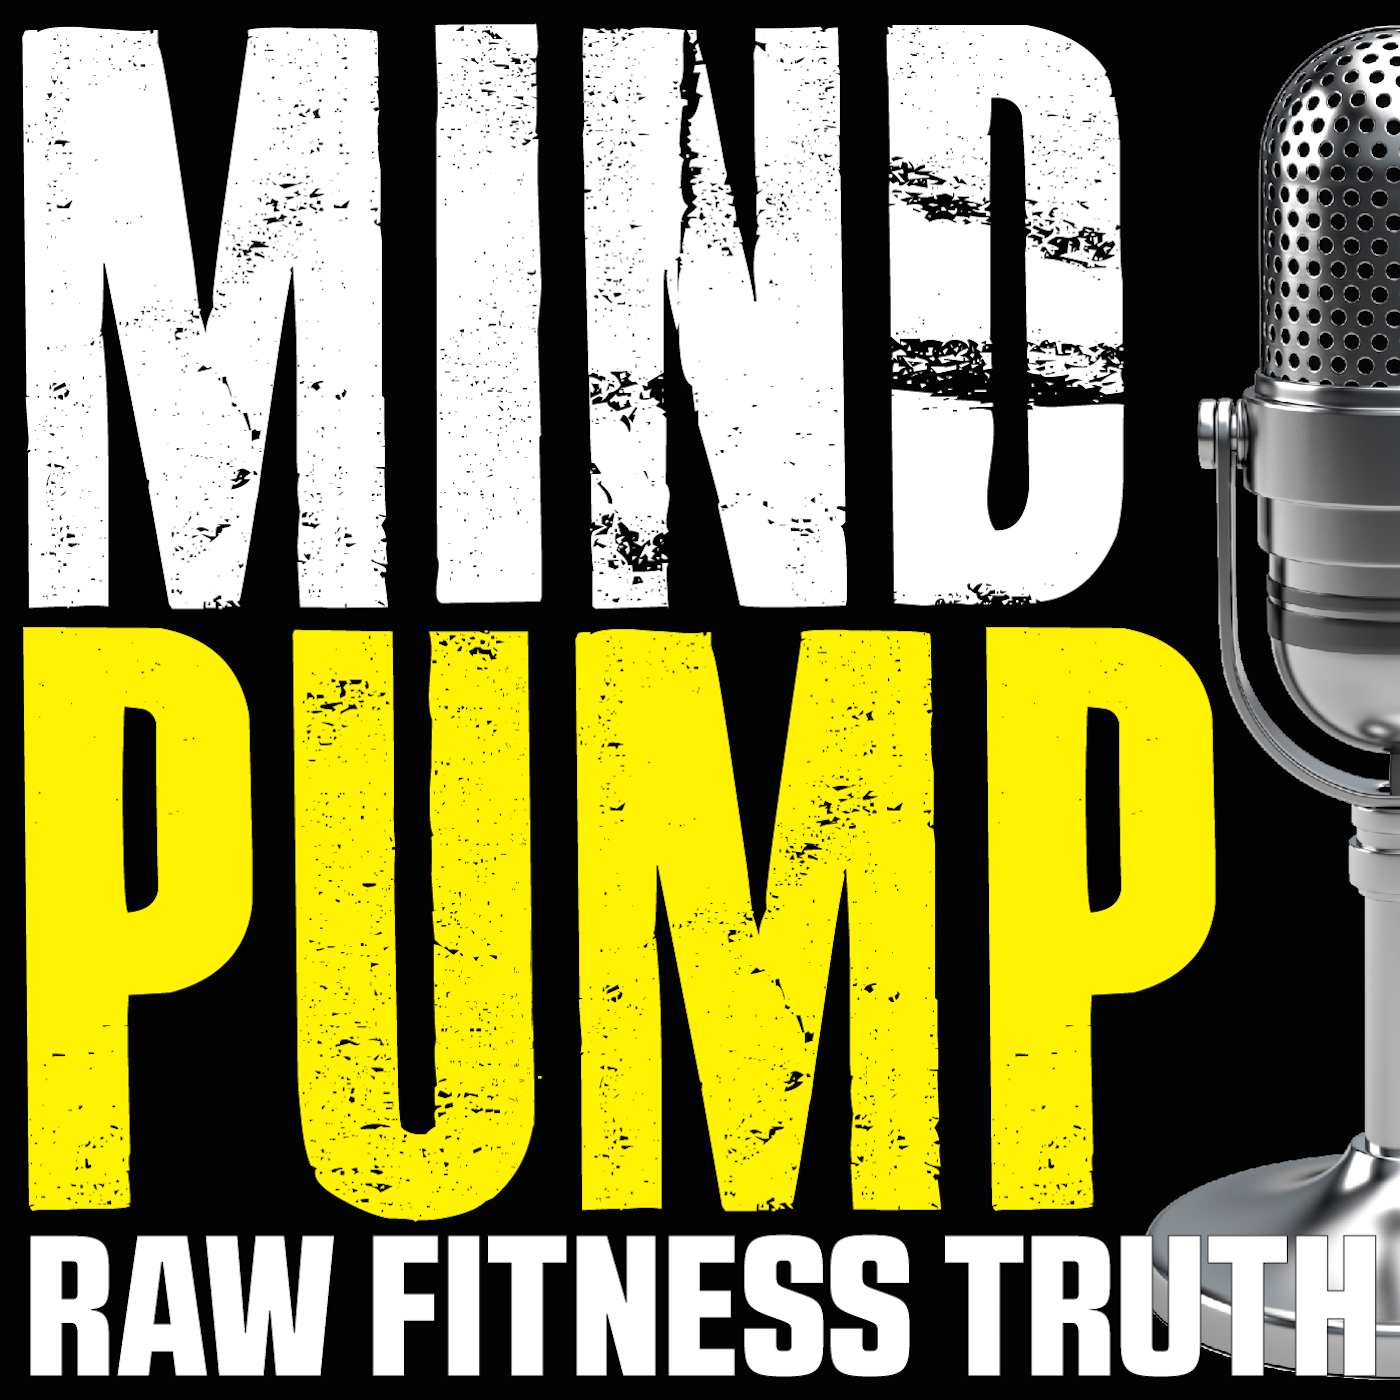 466: Burn More Fat & Build More Muscle by Undulating Your Calories & Macros